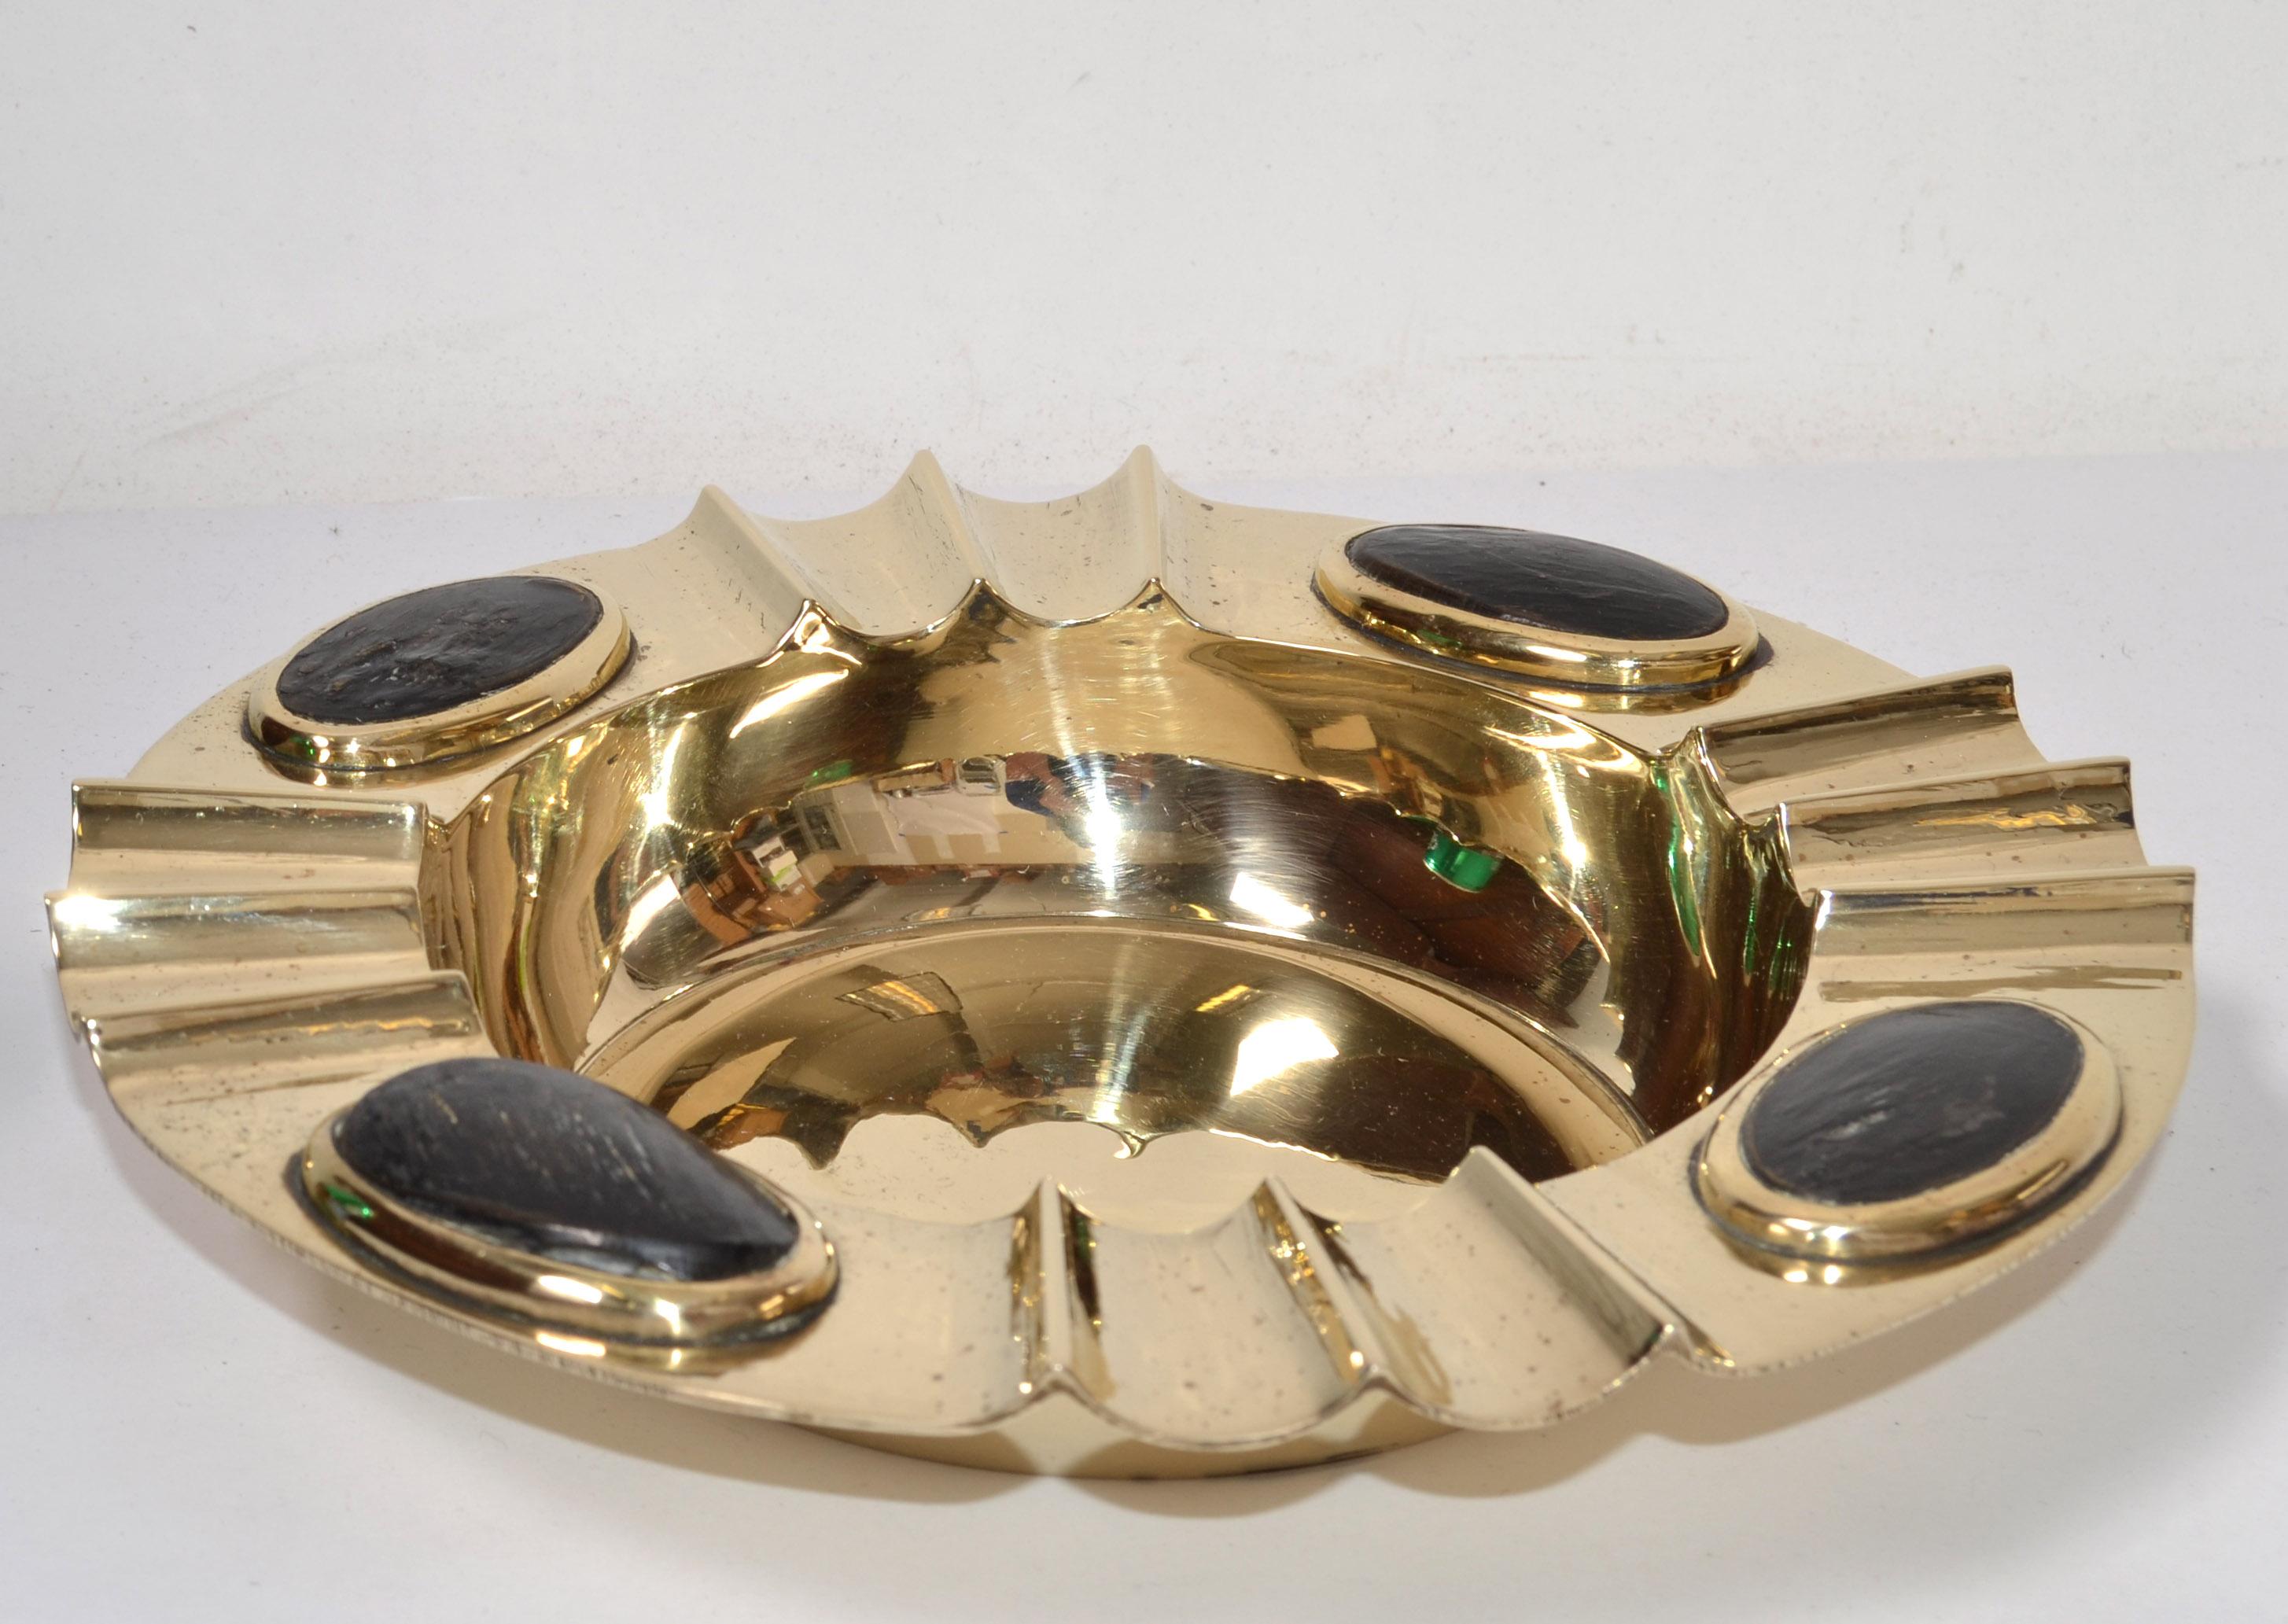 Art Deco Style Vintage polished solid bronze cigar ashtray with Bakelite Decor Inlays.
Marked underneath India.
In good vintage condition with marks and scratches to the black Bakelite Insert.